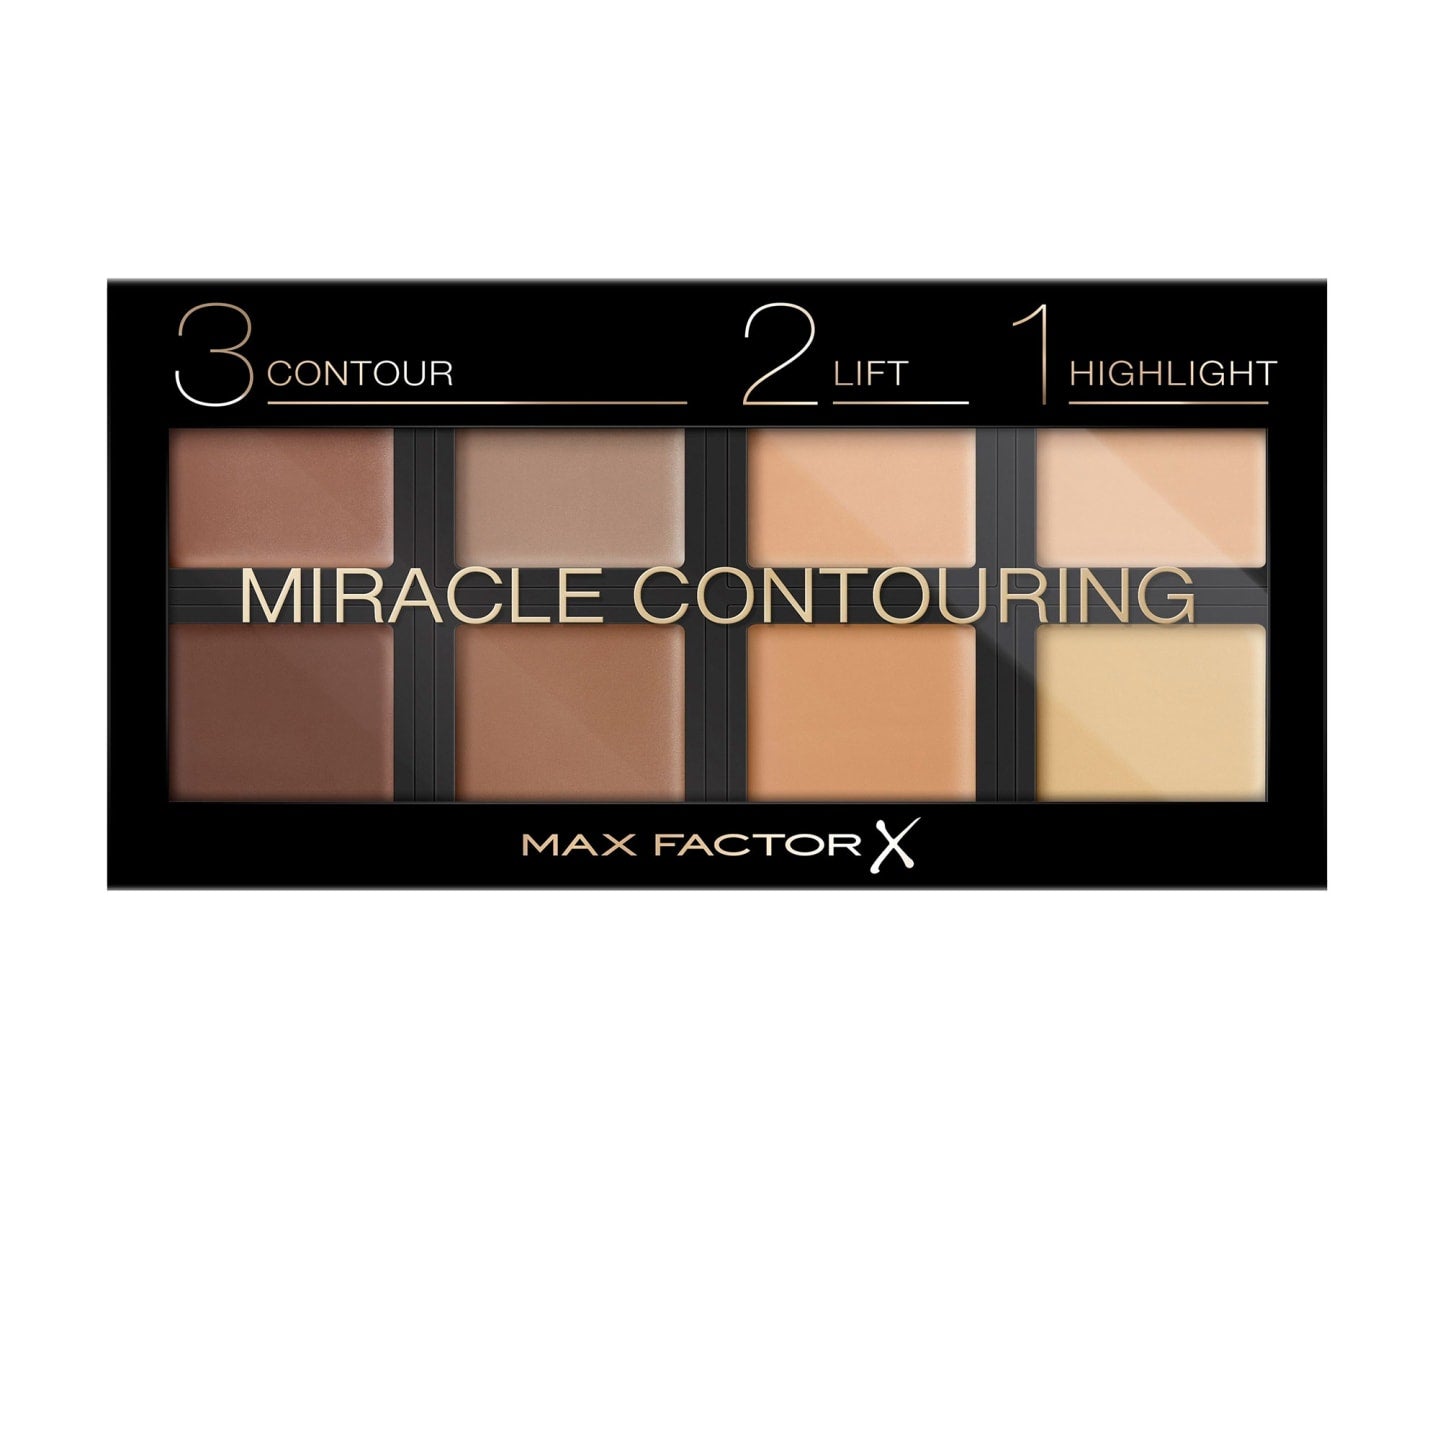 Max Factor Miracle contouring pallet - פלטת קונטורים מקס פקטור